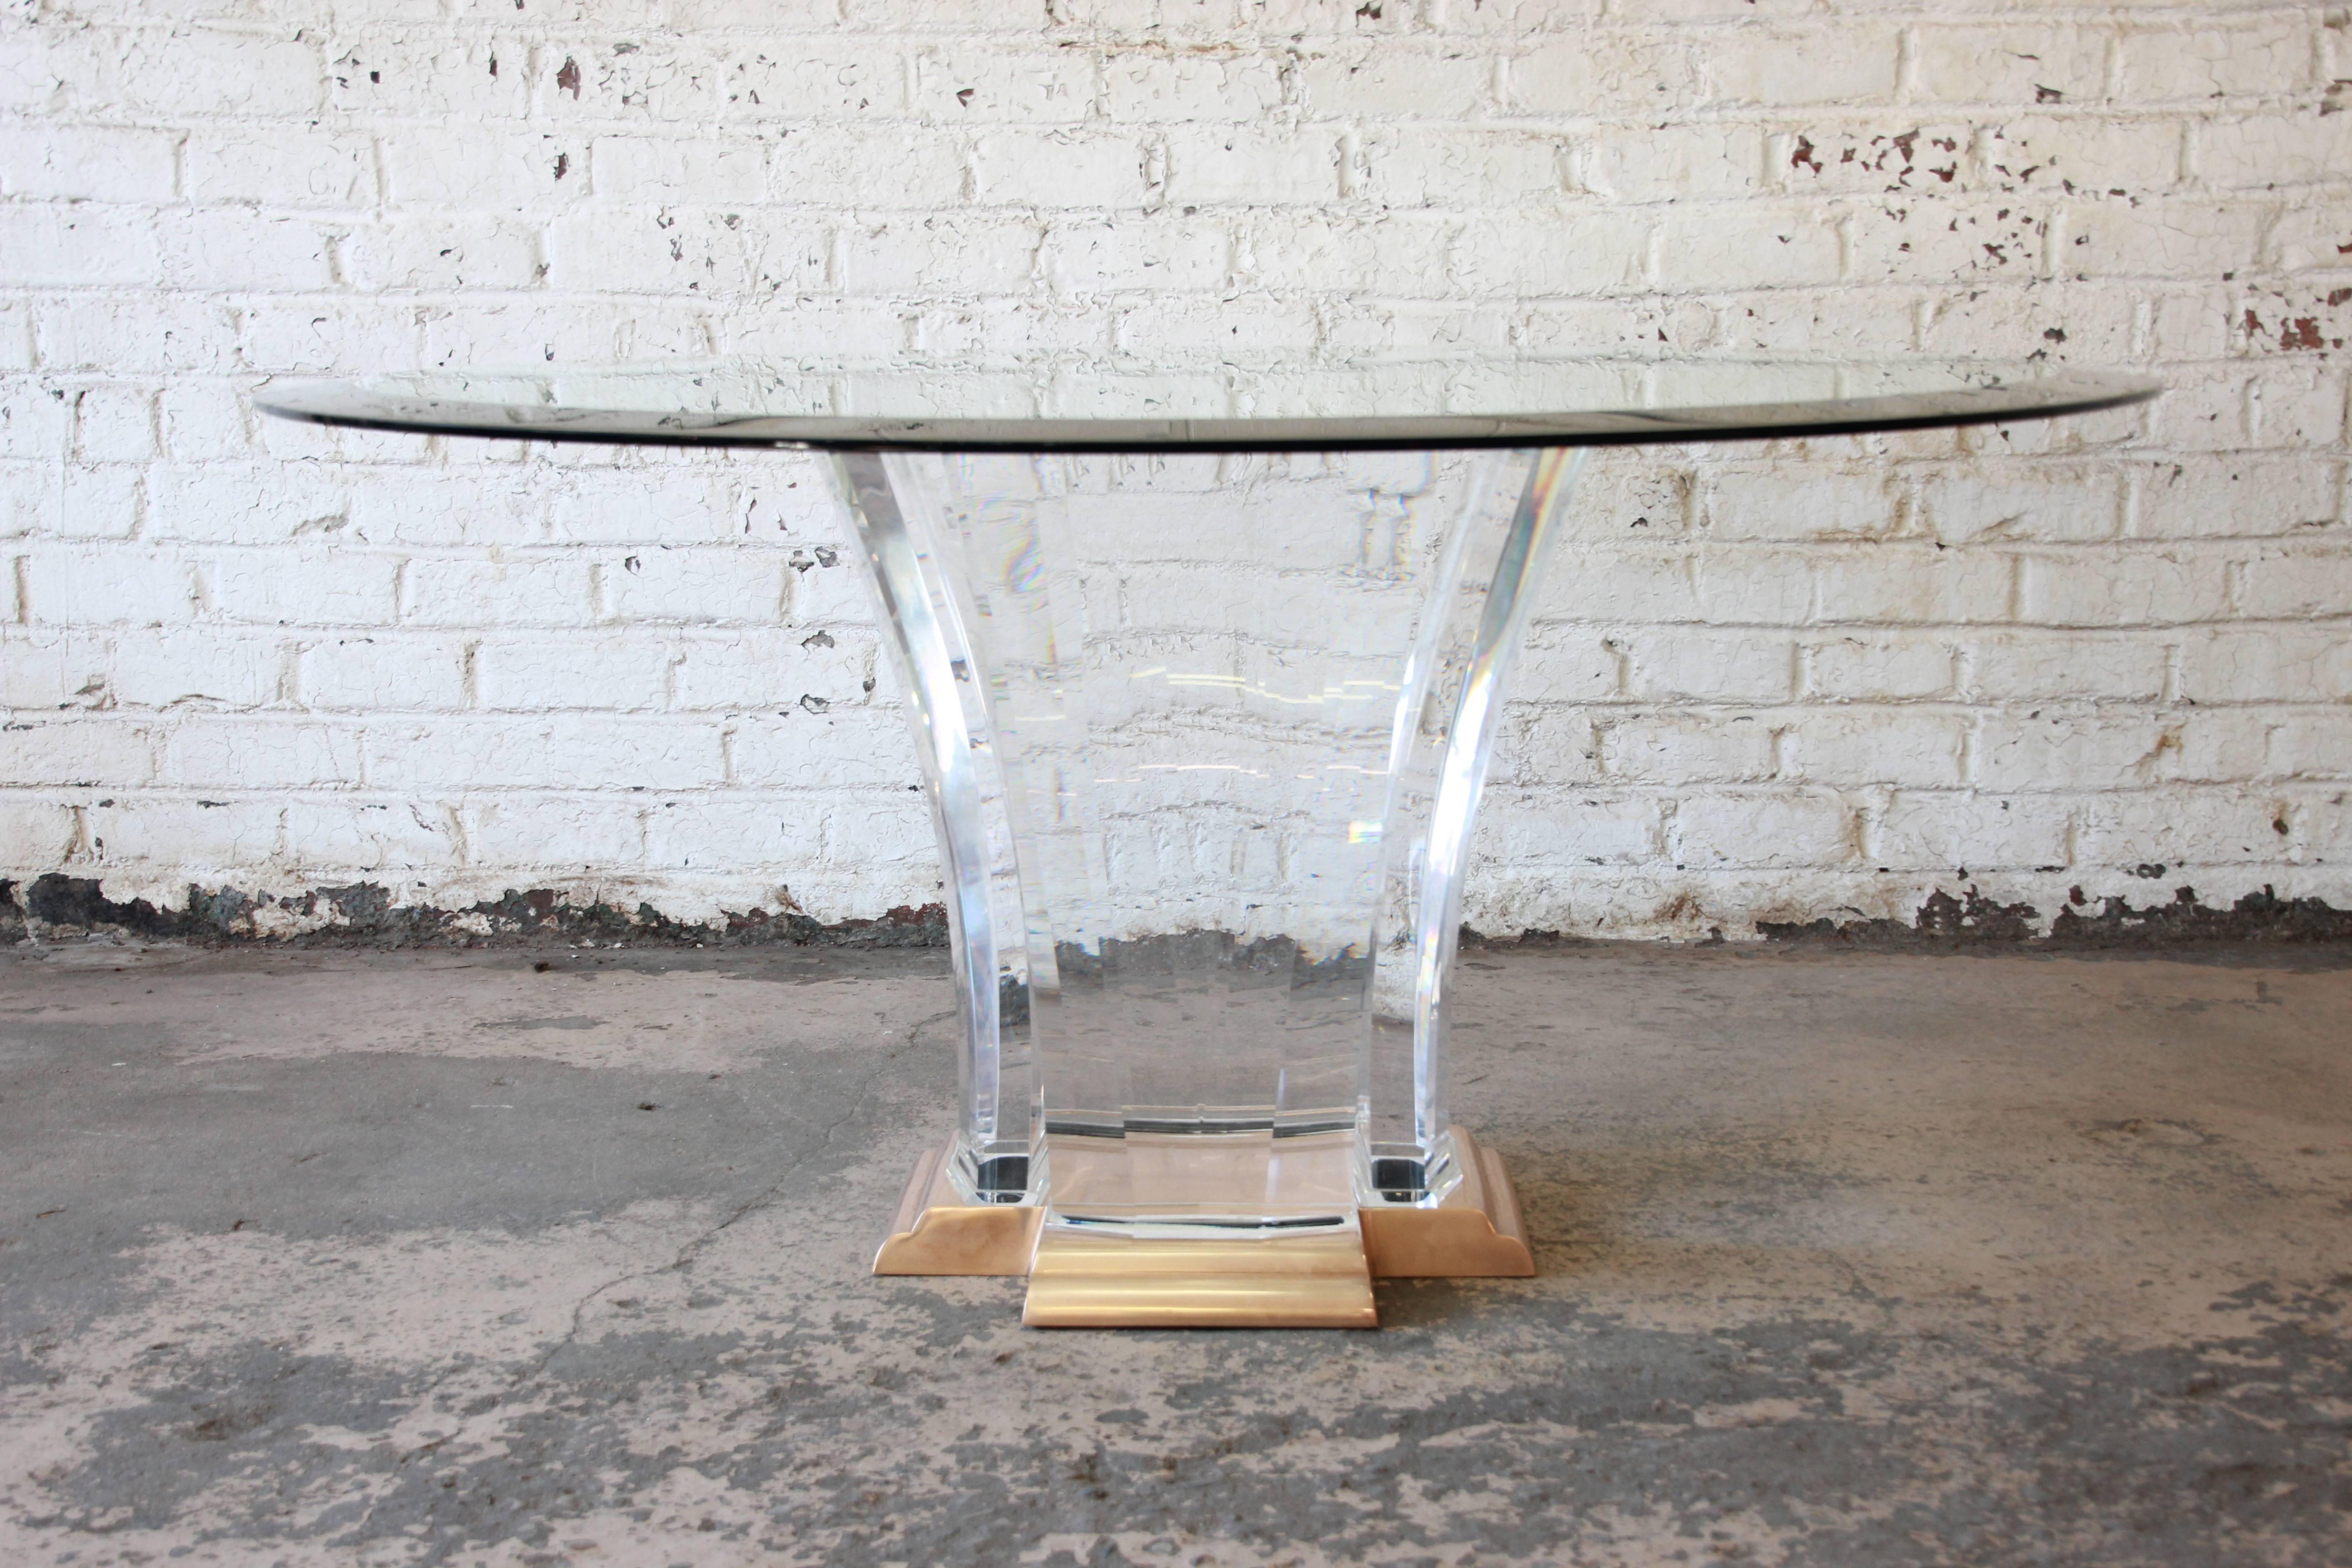 A rare and outstanding sculptural Art Deco inspired dining table designed by Jeffrey Bigelow. A scrolled cast-brass plateau anchors four gently arched, faceted cast-Lucite slab pedestals. The 60